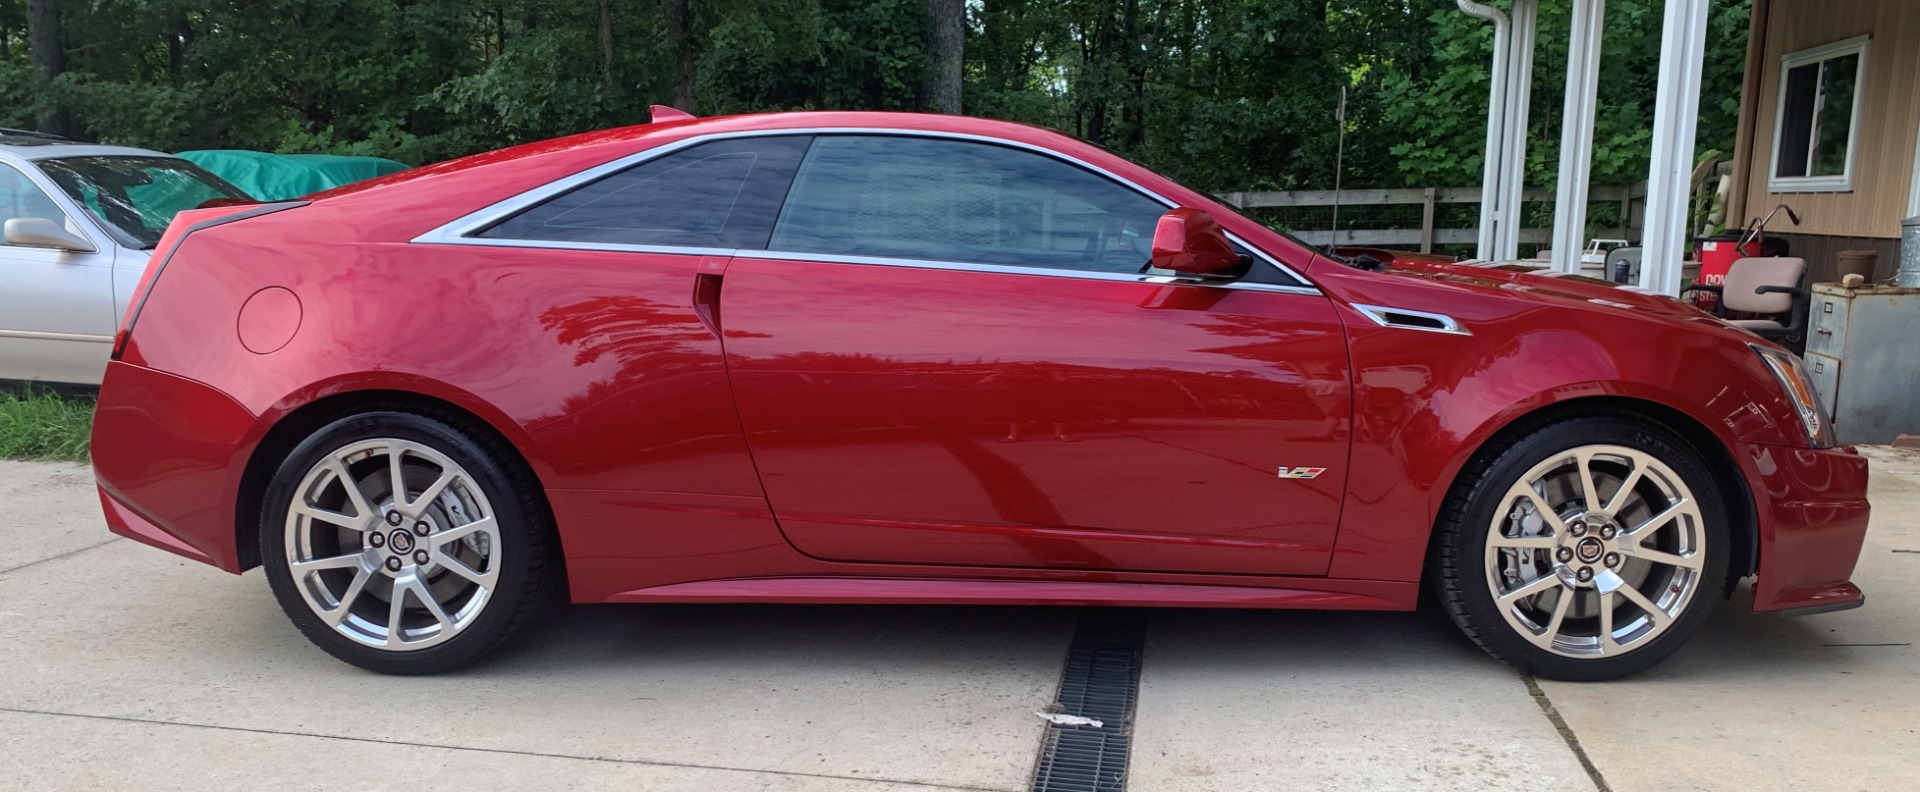 Used 2011 Cadillac CTS-V  215 , For Sale $45000, Call Us: (704) 996-3735